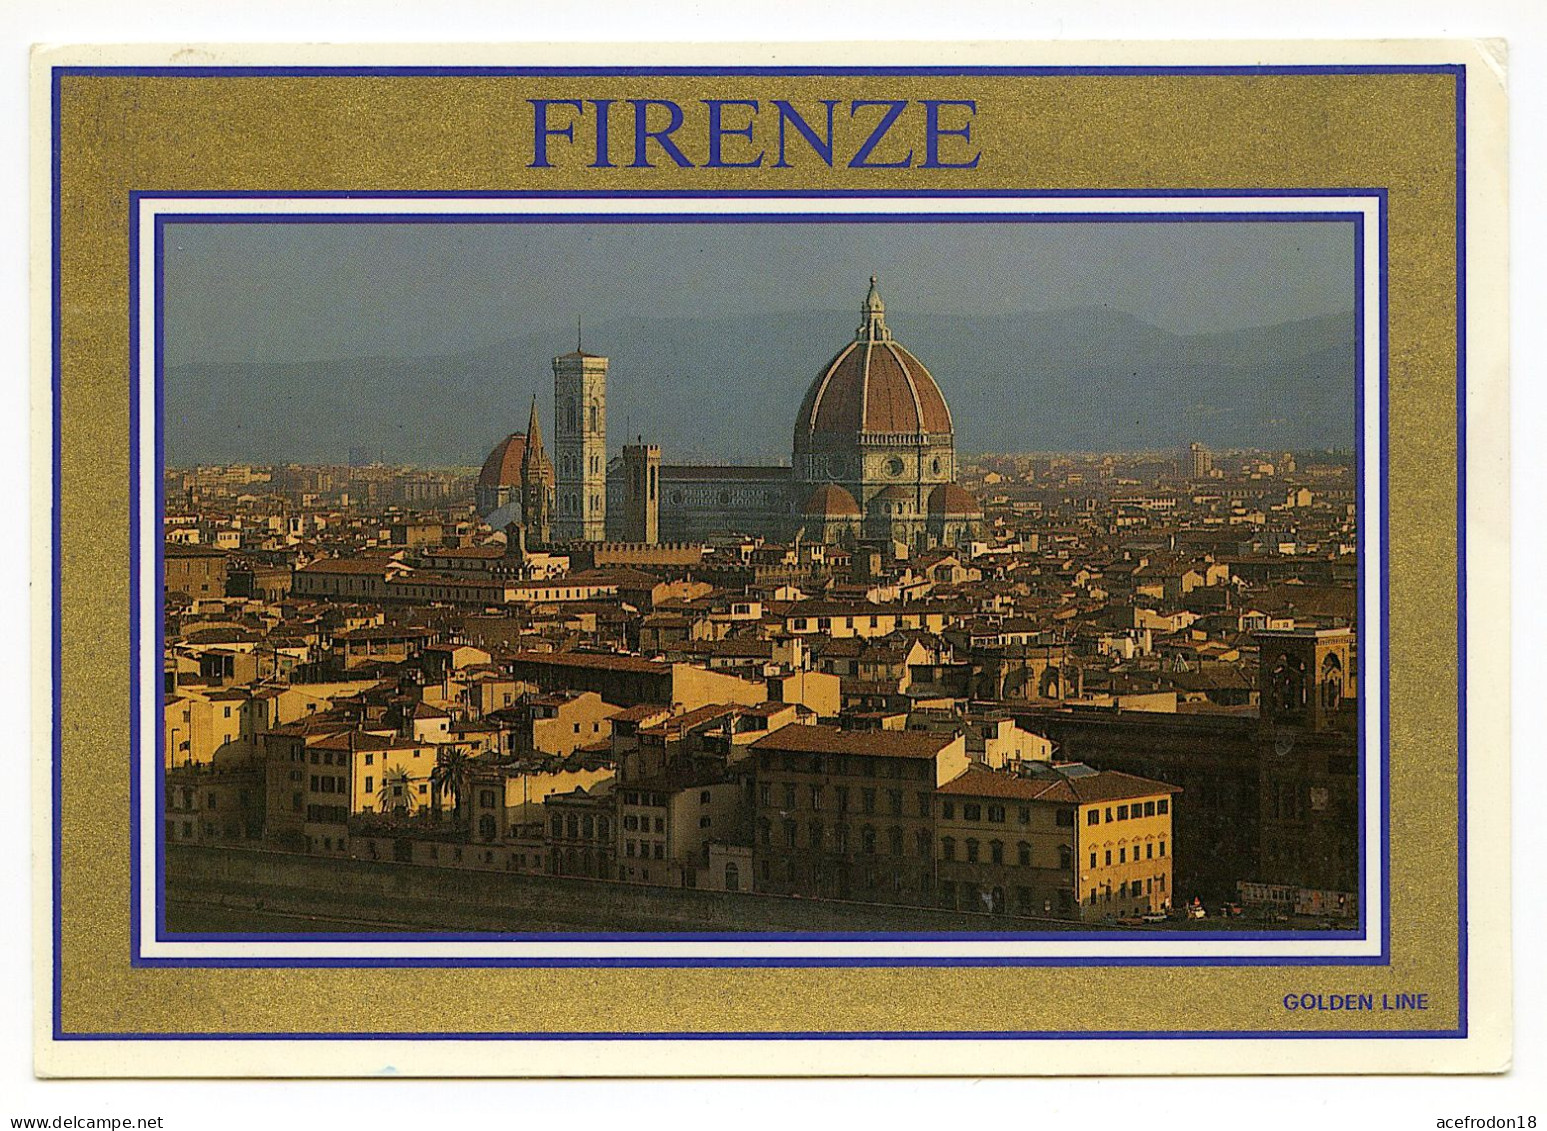 FIRENZE - Panorama Del Centro Storico - Firenze (Florence)